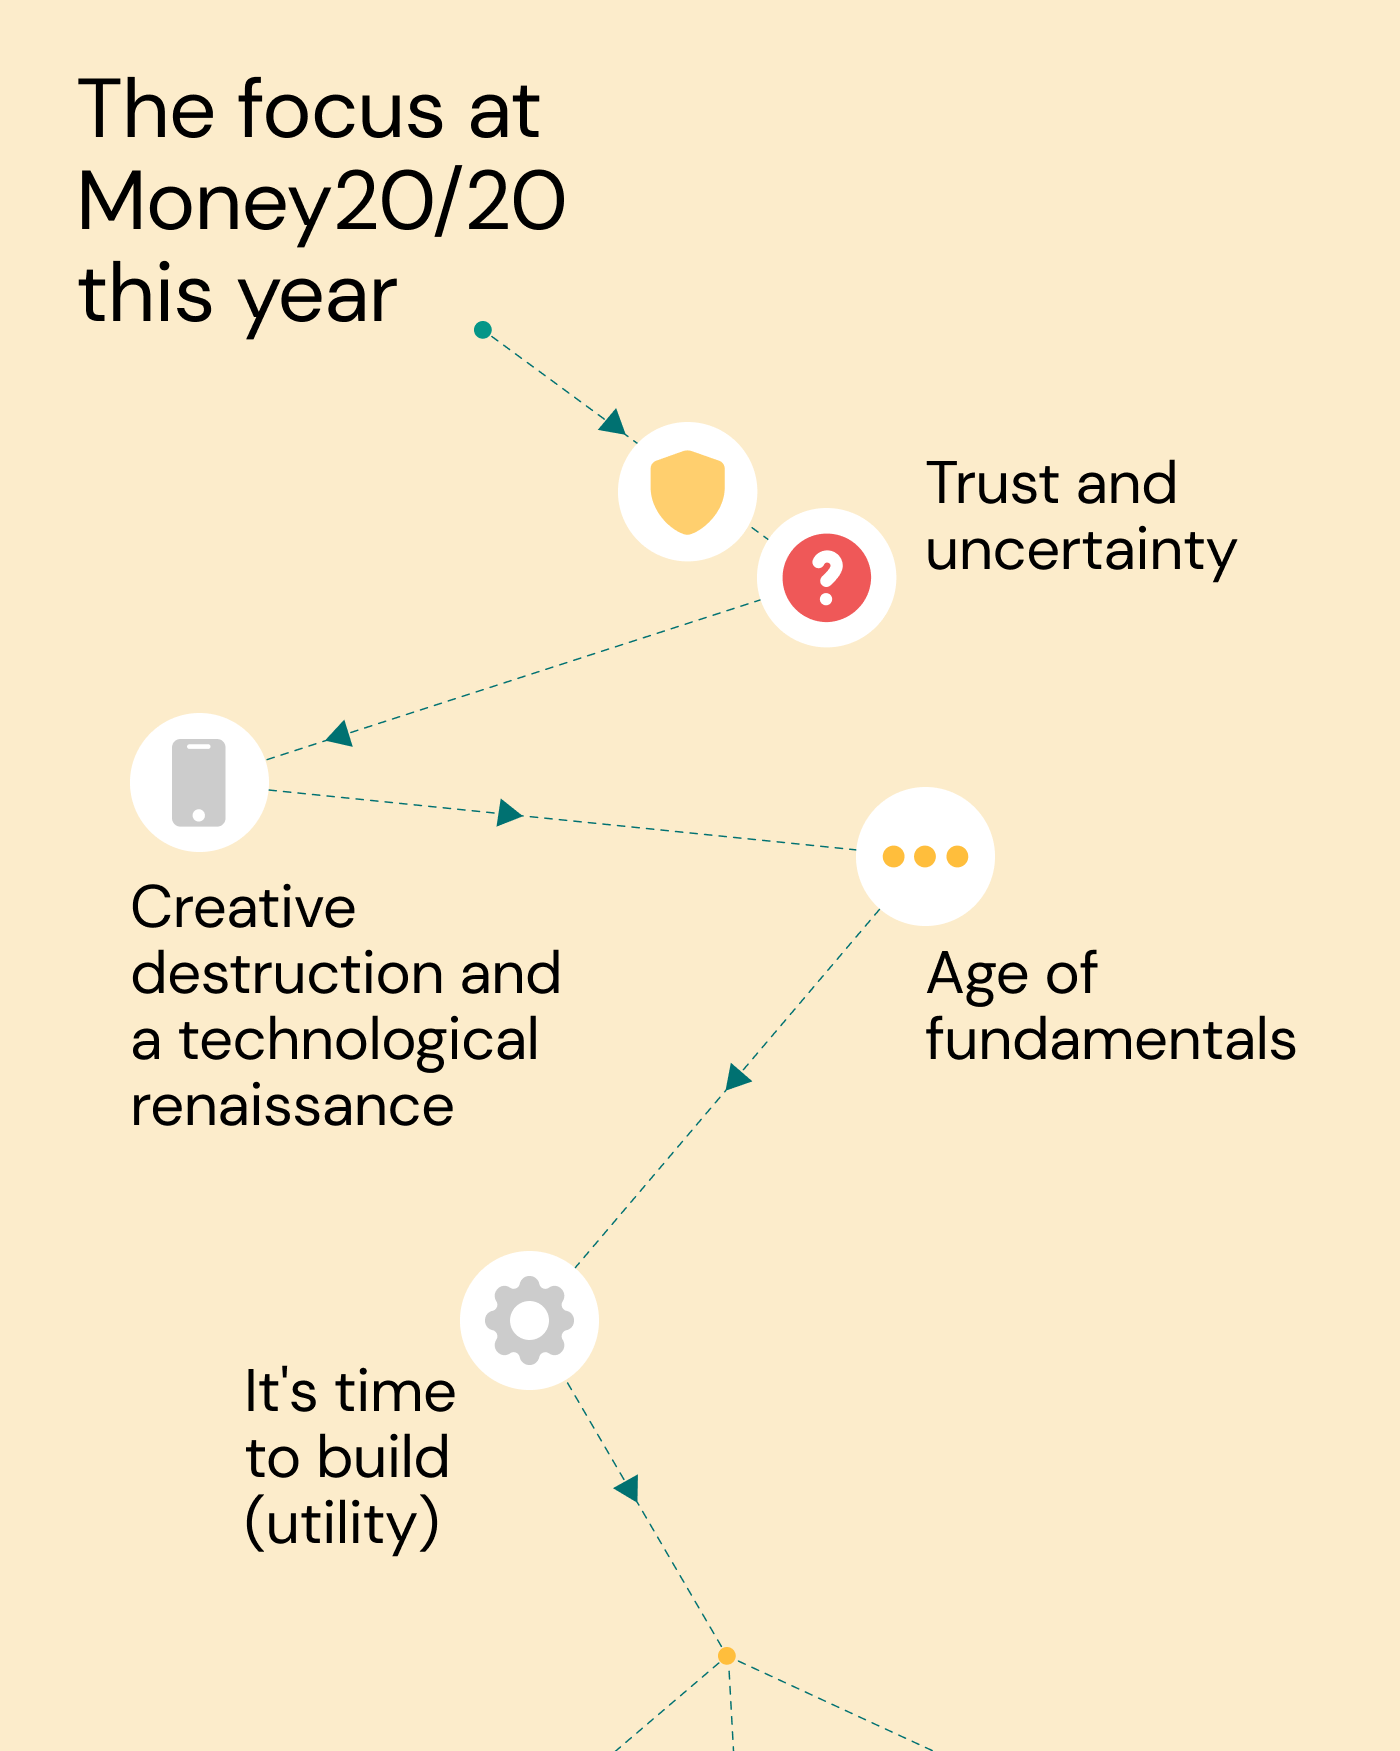 Image showing the focus of Money 2020